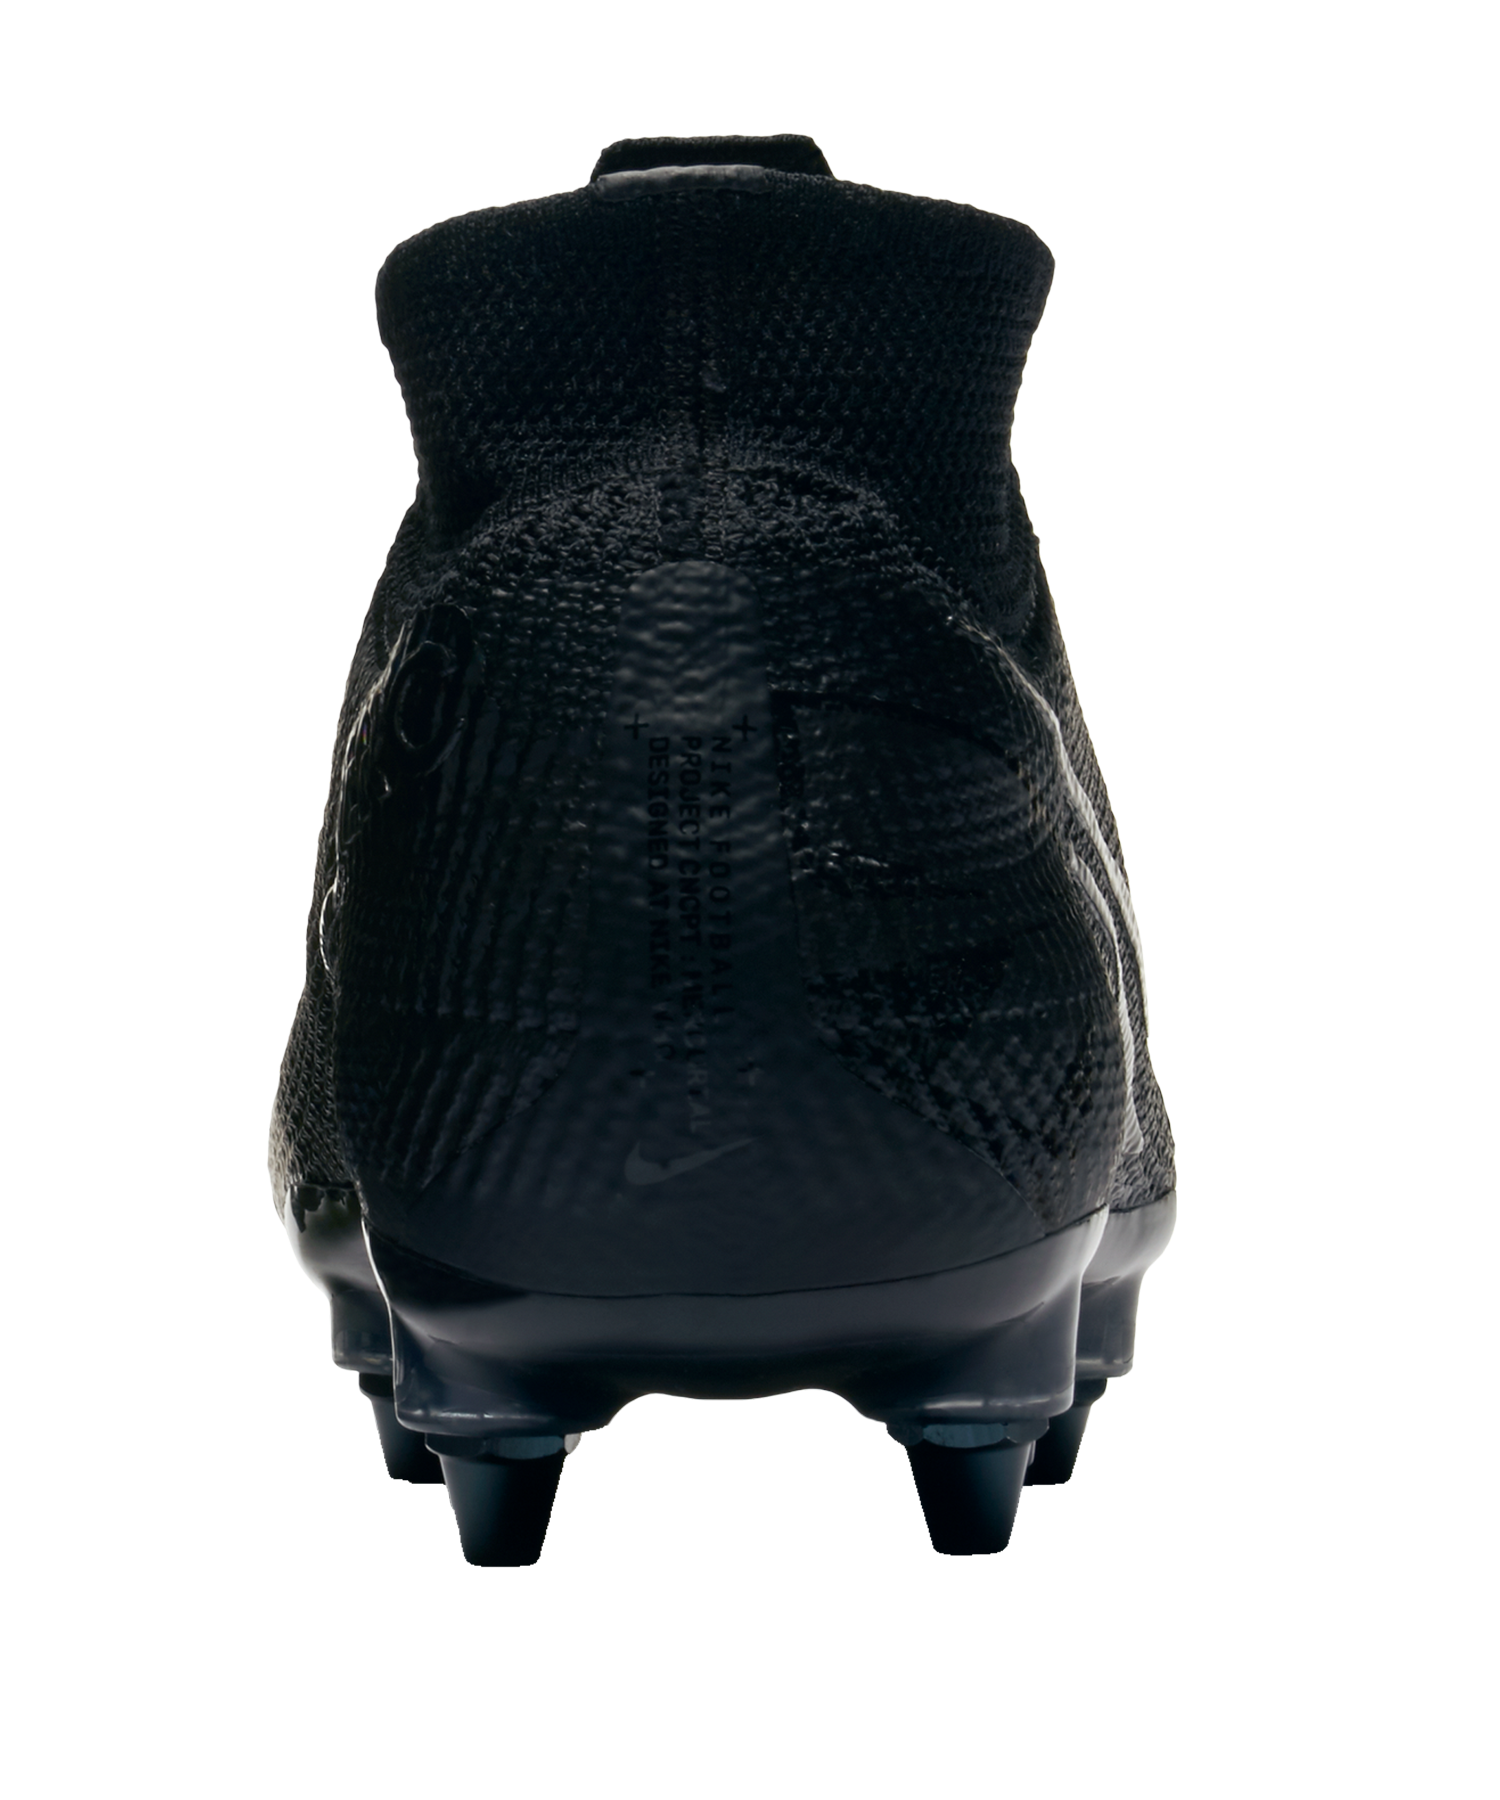 Nike Mercurial Superfly 6 Pro AG PRO Stealth Ops Black.